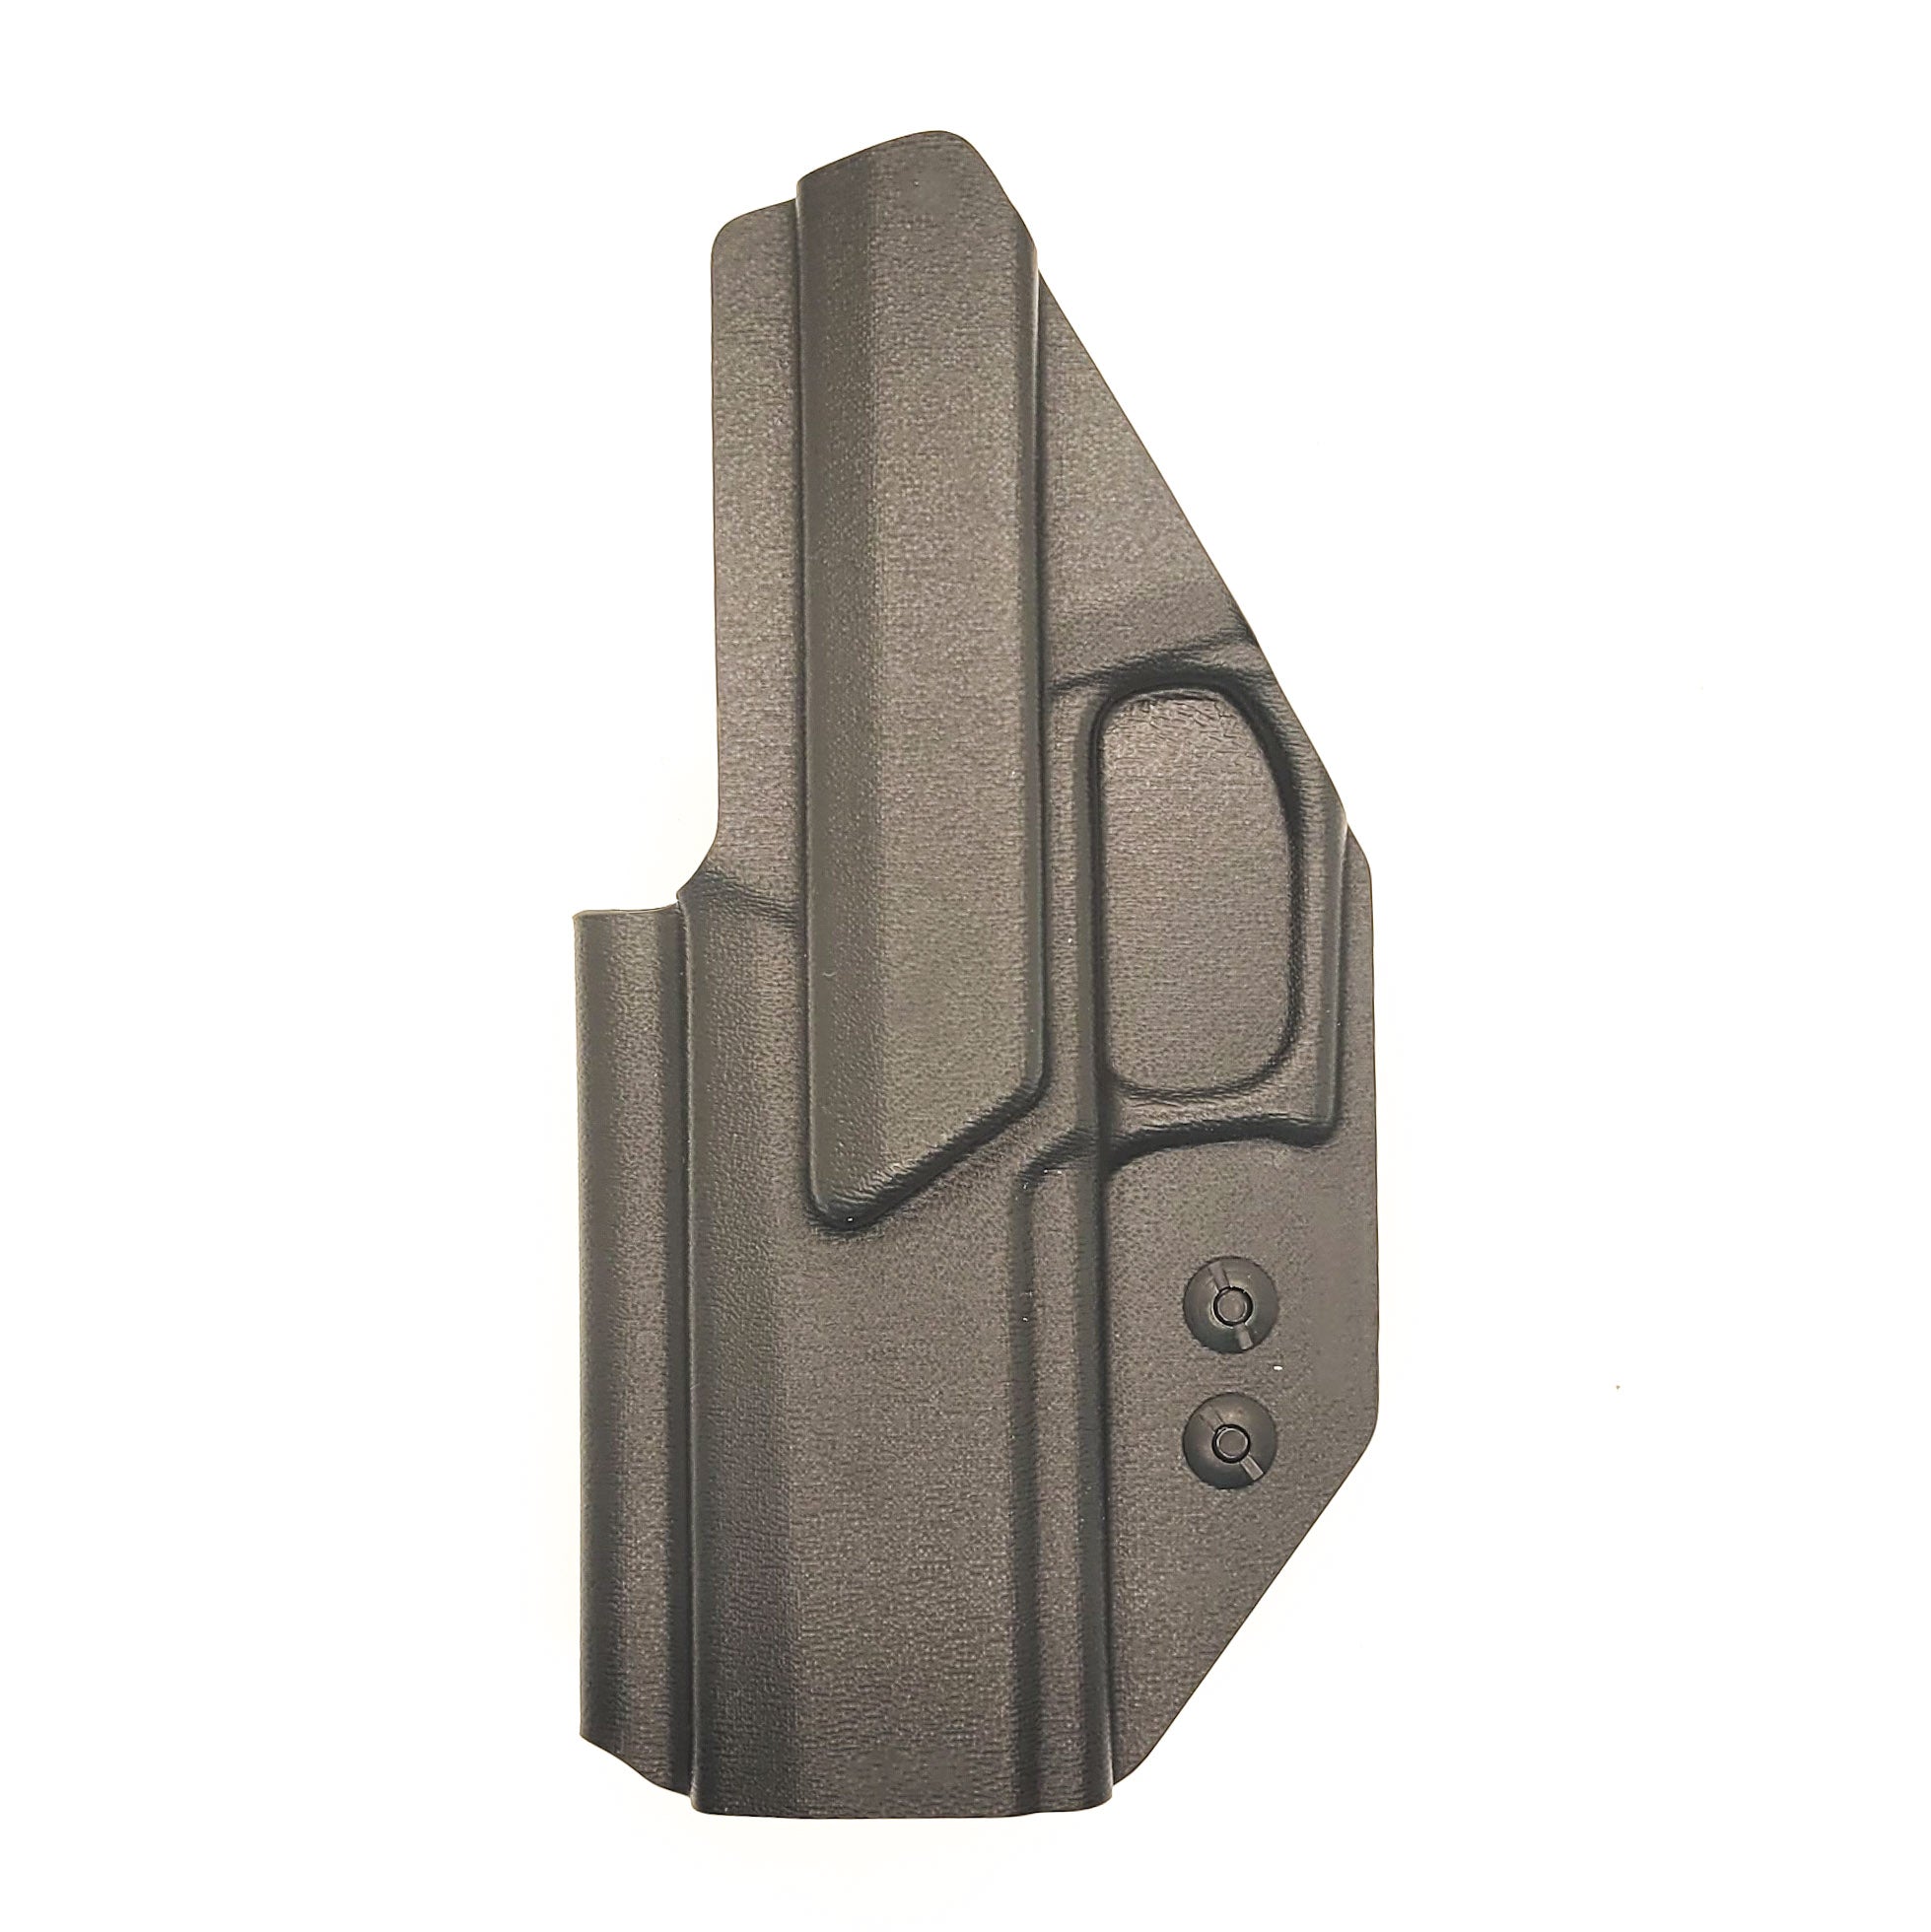 Inside Waistband Kydex Thermoplastic Holster designed to fit all P320 Carry pistols, including the M18 with Align Tactical Thumb Rest Takedown Lever. This holster will fit the P320 Wilson Combat Carry grip.  Adjustable retention, profile cleared for red dot sights. Made in USA by Law Enforcement and Military Veterans.